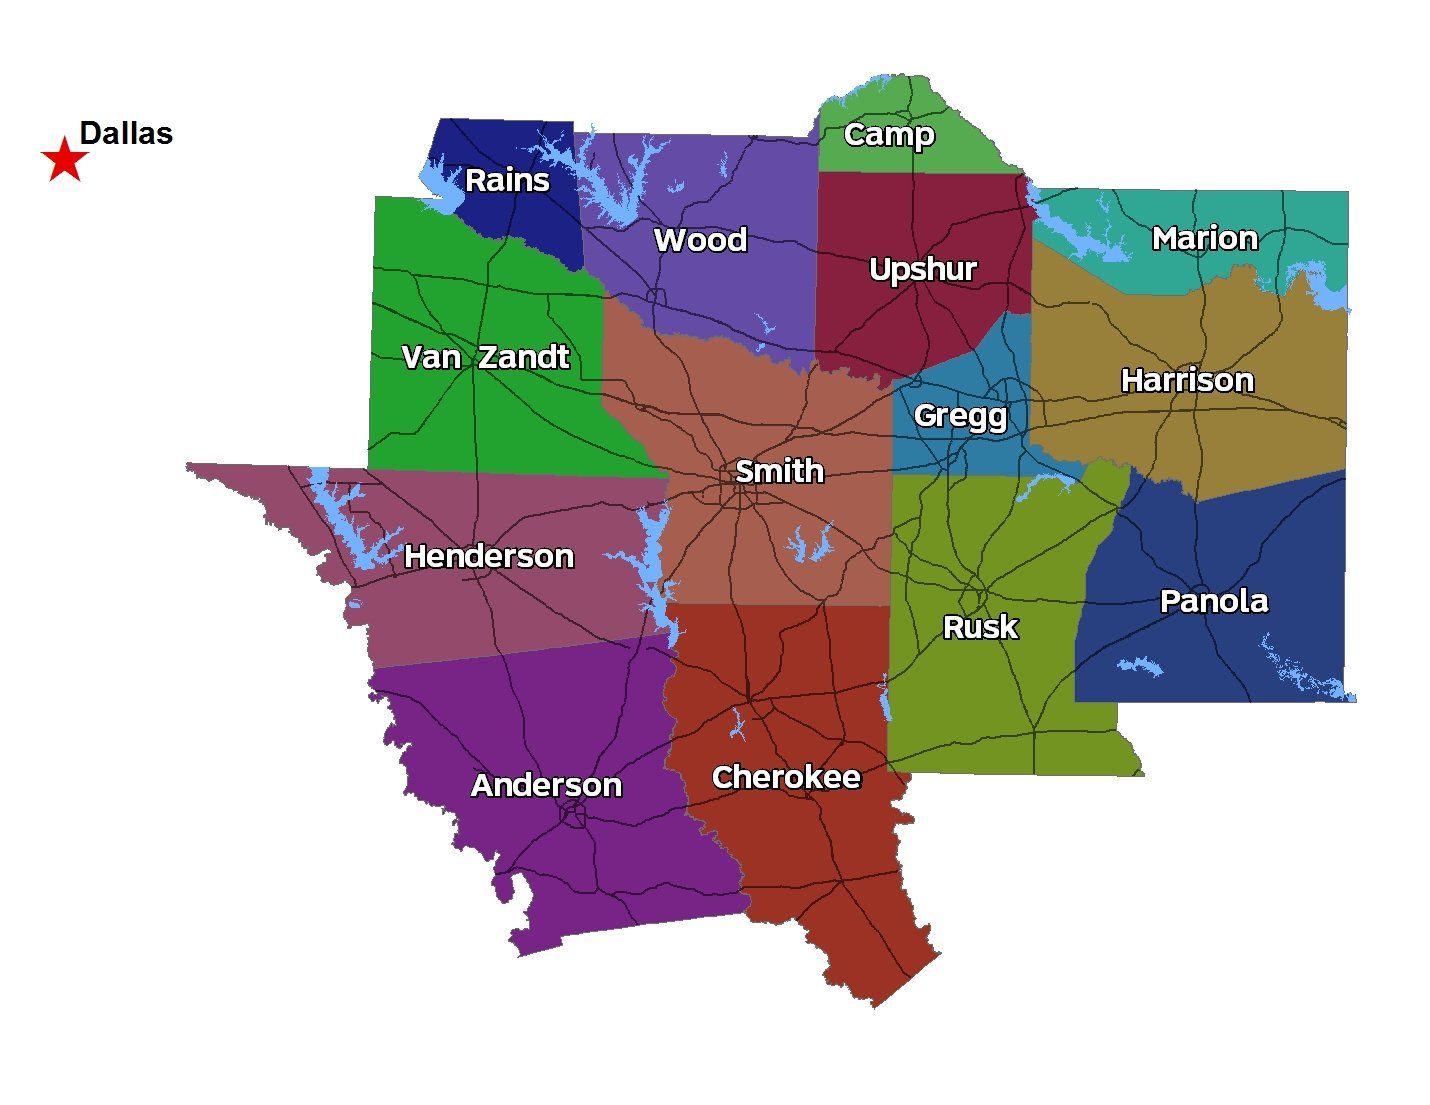 Anderson, Camp, Cherokee, Harrison, Henderson, Marion, Panola, Rains, Rusk, Upshur, Van Zandt, and Wood Counties and the non-urbanized areas of Gregg and Smith Counties